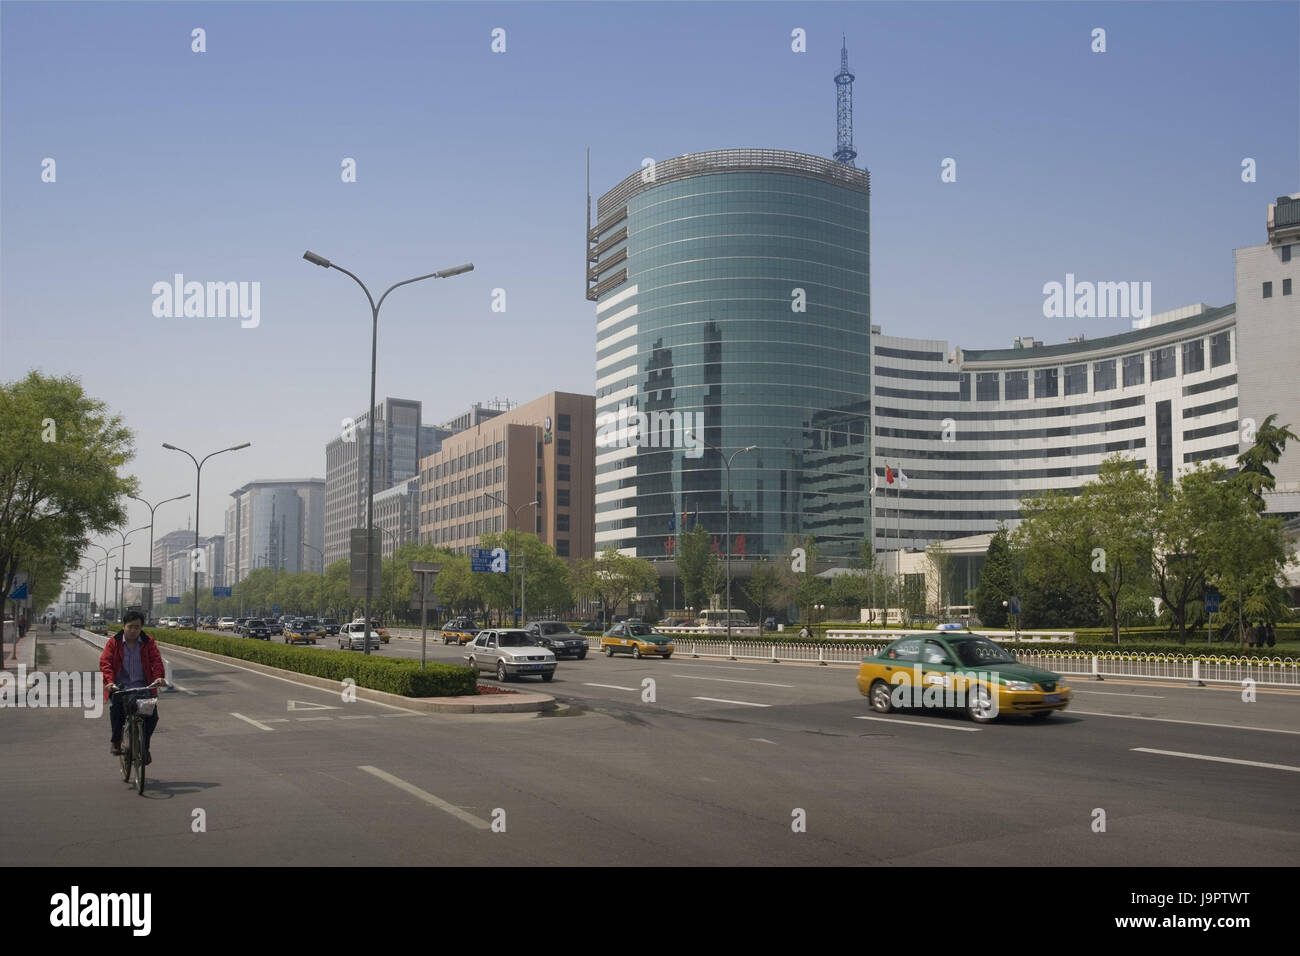 China,Peking,Jianguomennei Daijie street scene,Asia,Eastern Asia,town,capital,destination,building,architecture,office building,high rises,traffic,cyclist,cars,taxis,traffic,multi-lane, Stock Photo